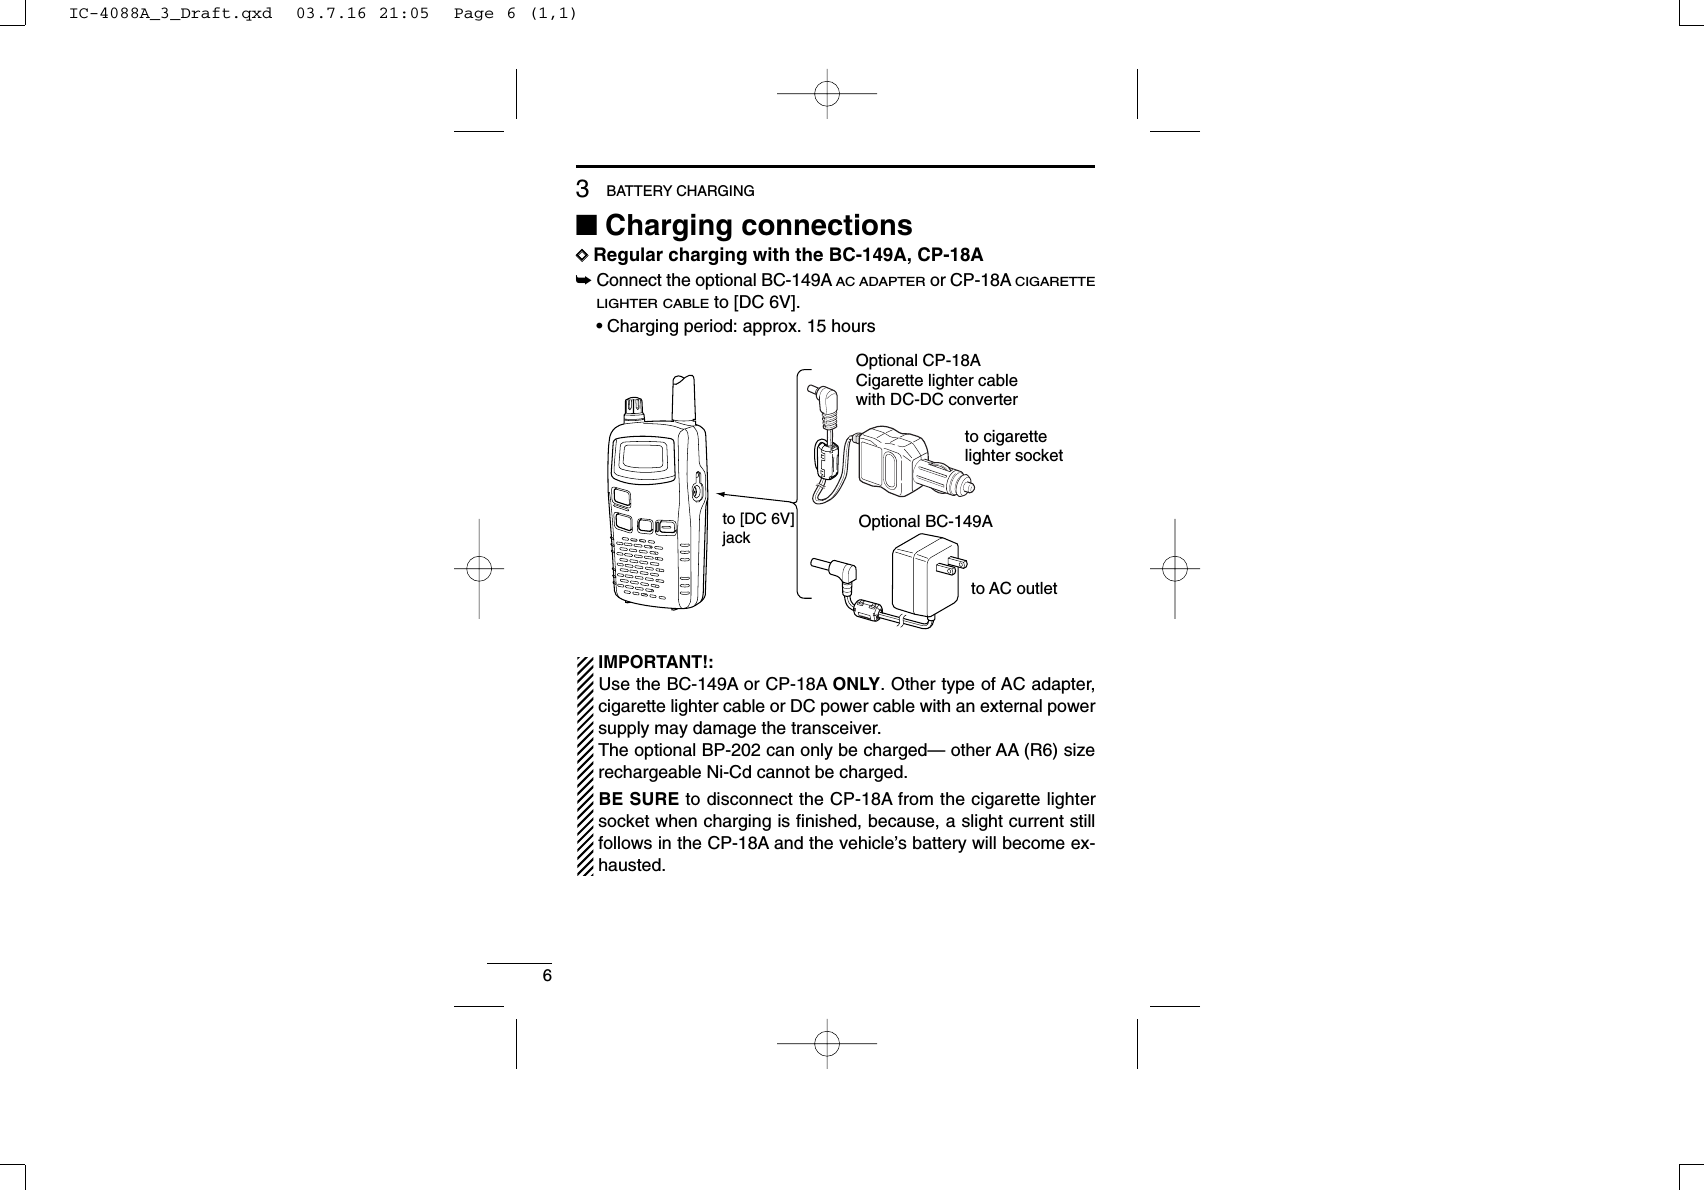 63BATTERY CHARGING■Charging connectionsDDRegular charging with the BC-149A, CP-18A➥Connect the optional BC-149AAC ADAPTERor CP-18ACIGARETTELIGHTER CABLEto [DC 6V].•Charging period: approx. 15 hoursIMPORTANT!:Use the BC-149A or CP-18A ONLY. Other type of AC adapter,cigarette lighter cable or DC power cable with an external powersupply may damage the transceiver.The optional BP-202 can only be charged— other AA (R6) sizerechargeable Ni-Cd cannot be charged.BE SURE to disconnect the CP-18A from the cigarette lightersocket when charging is ﬁnished, because, a slight current stillfollows in the CP-18A and the vehicle’s battery will become ex-hausted.to [DC 6V]jackOptional CP-18ACigarette lighter cable with DC-DC converterOptional BC-149Ato cigarette lighter socketto AC outletIC-4088A_3_Draft.qxd  03.7.16 21:05  Page 6 (1,1)